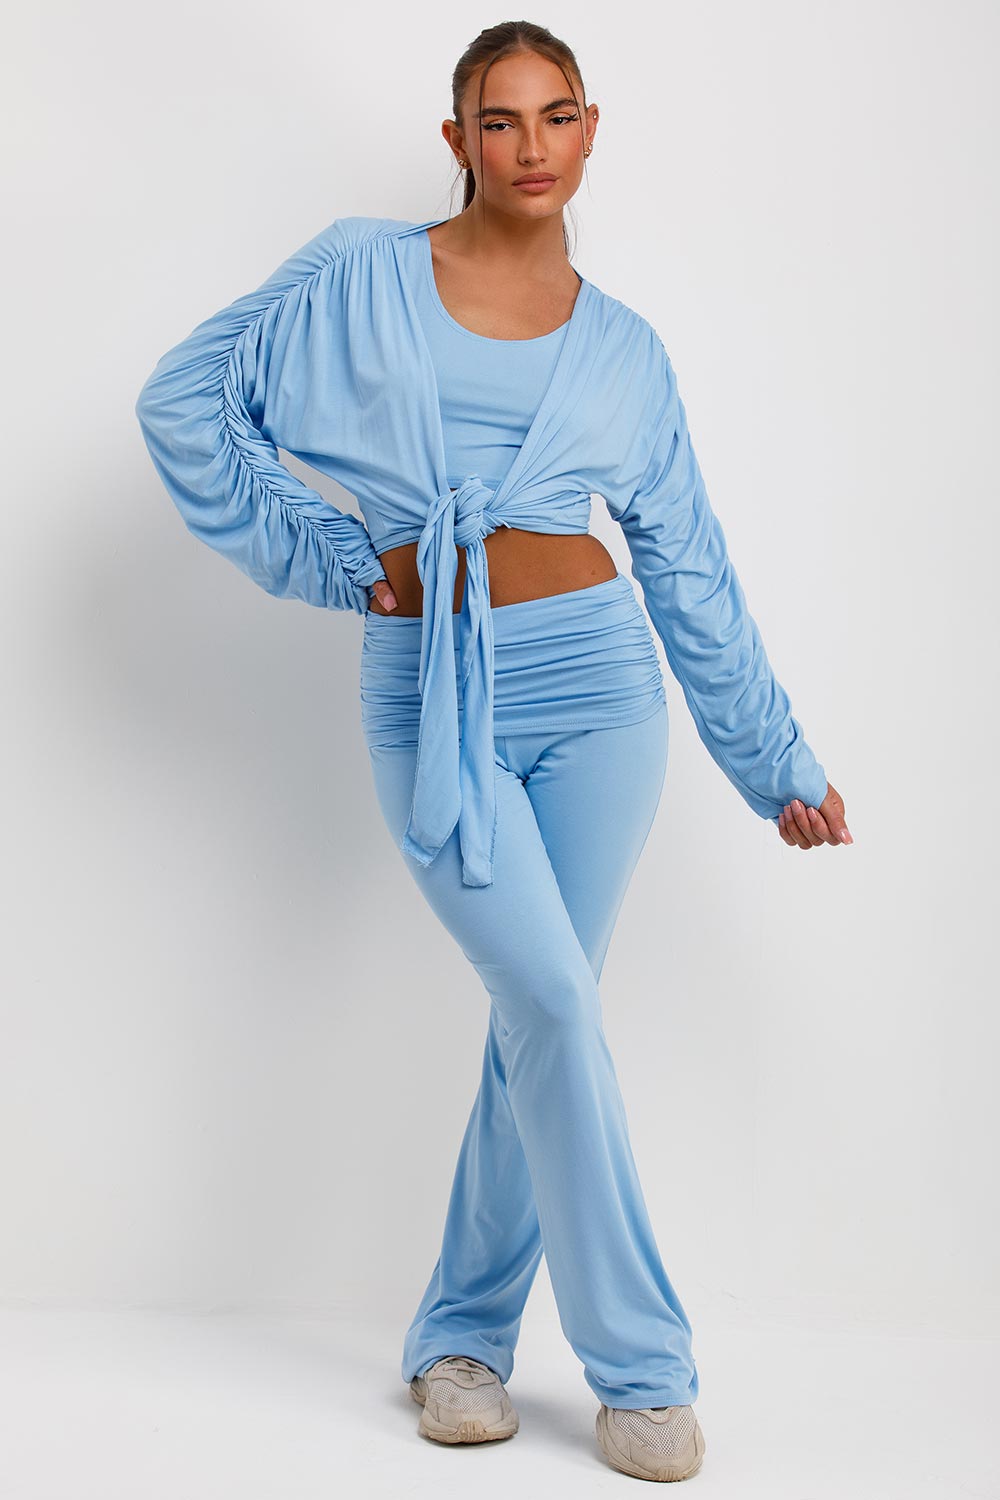 fold detail flared trousers crop top and ruched sleeve cardigan three piece matching set womens loungewear co ord